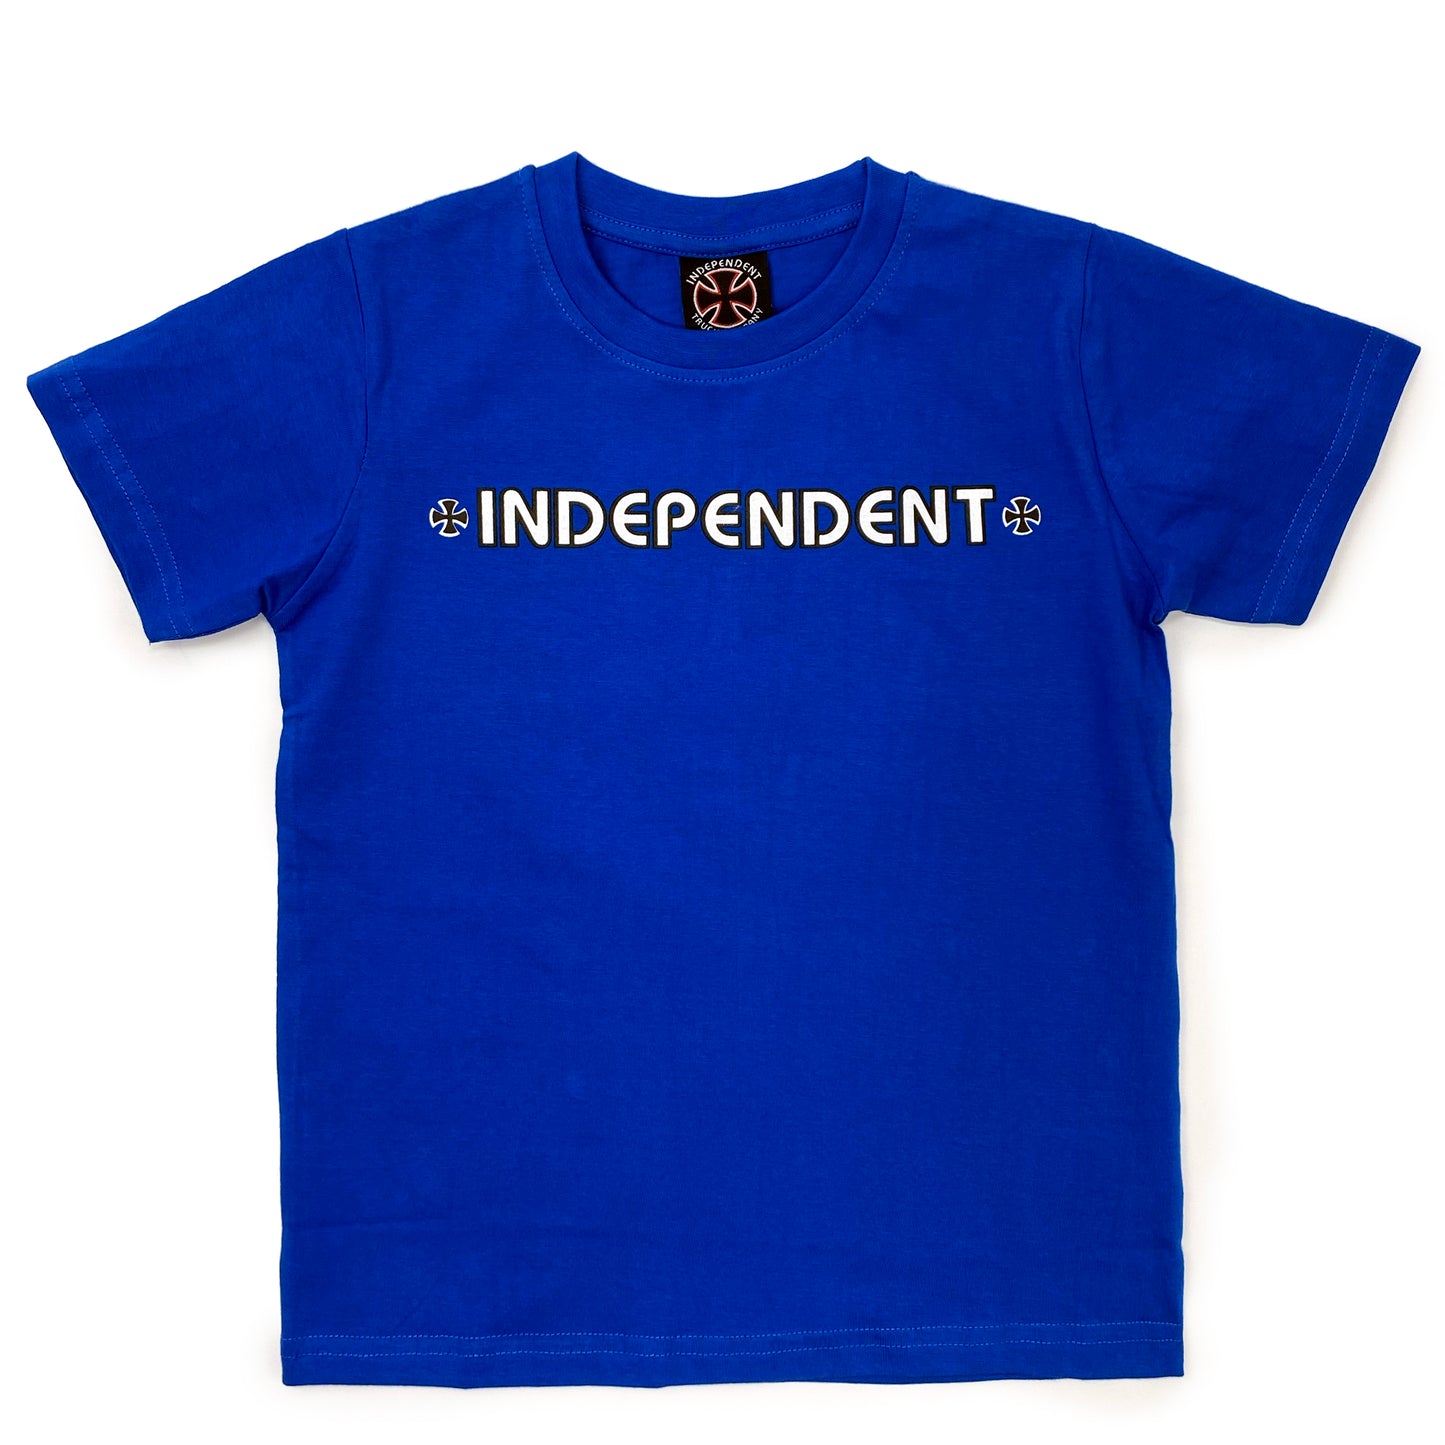 Independent Youth Bar Cross T-Shirt - Royal - Prime Delux Store